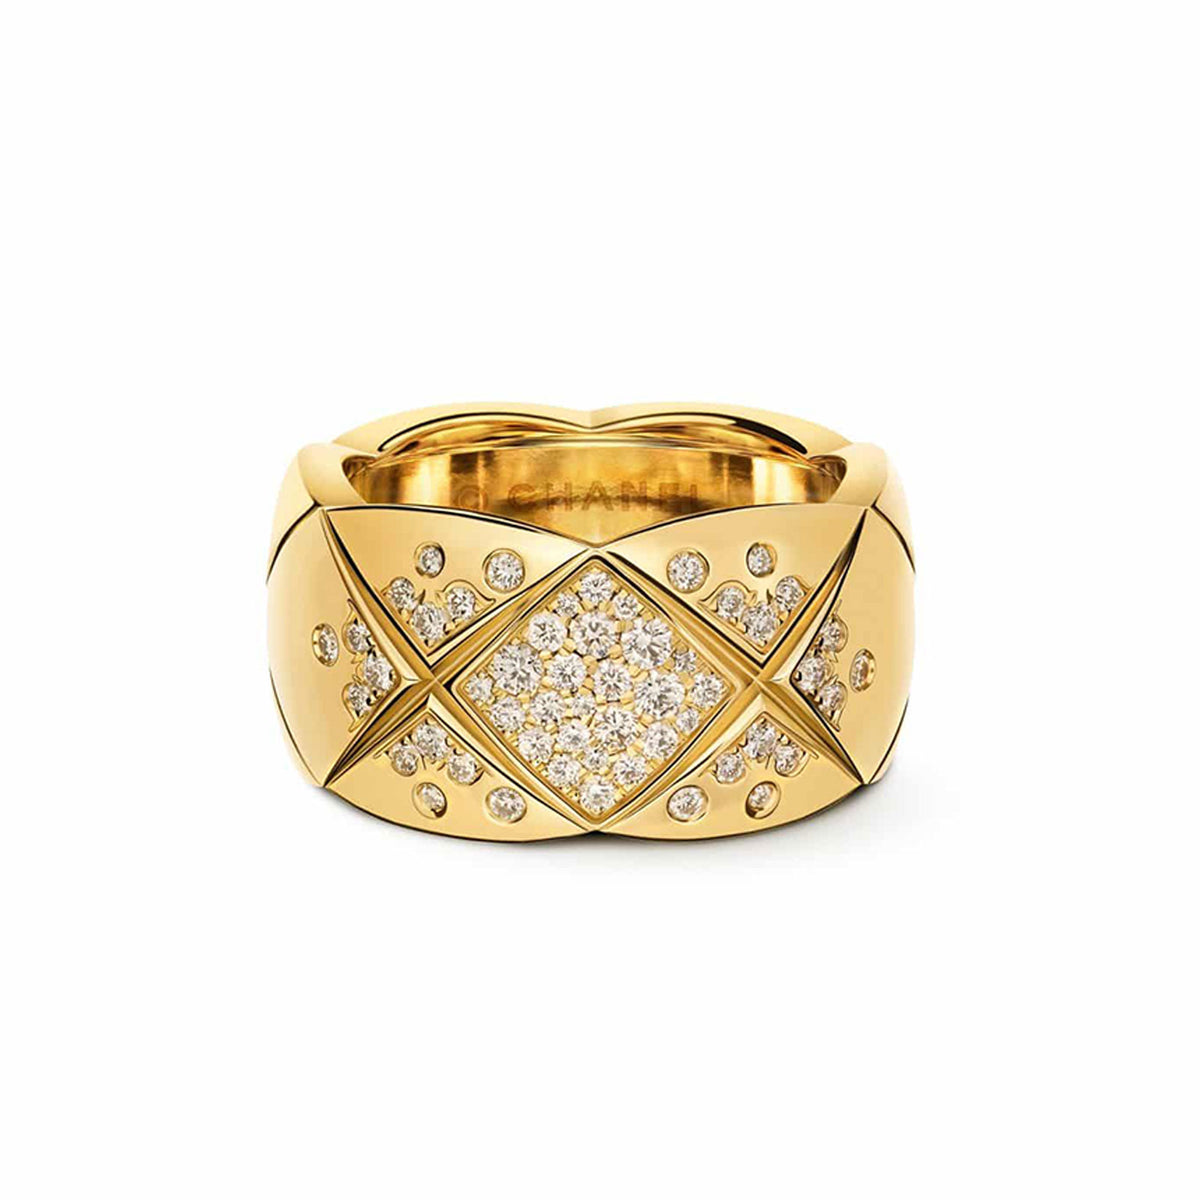 Women's Ring Coco Crush Yellow Gold By CHANEL– CD Peacock